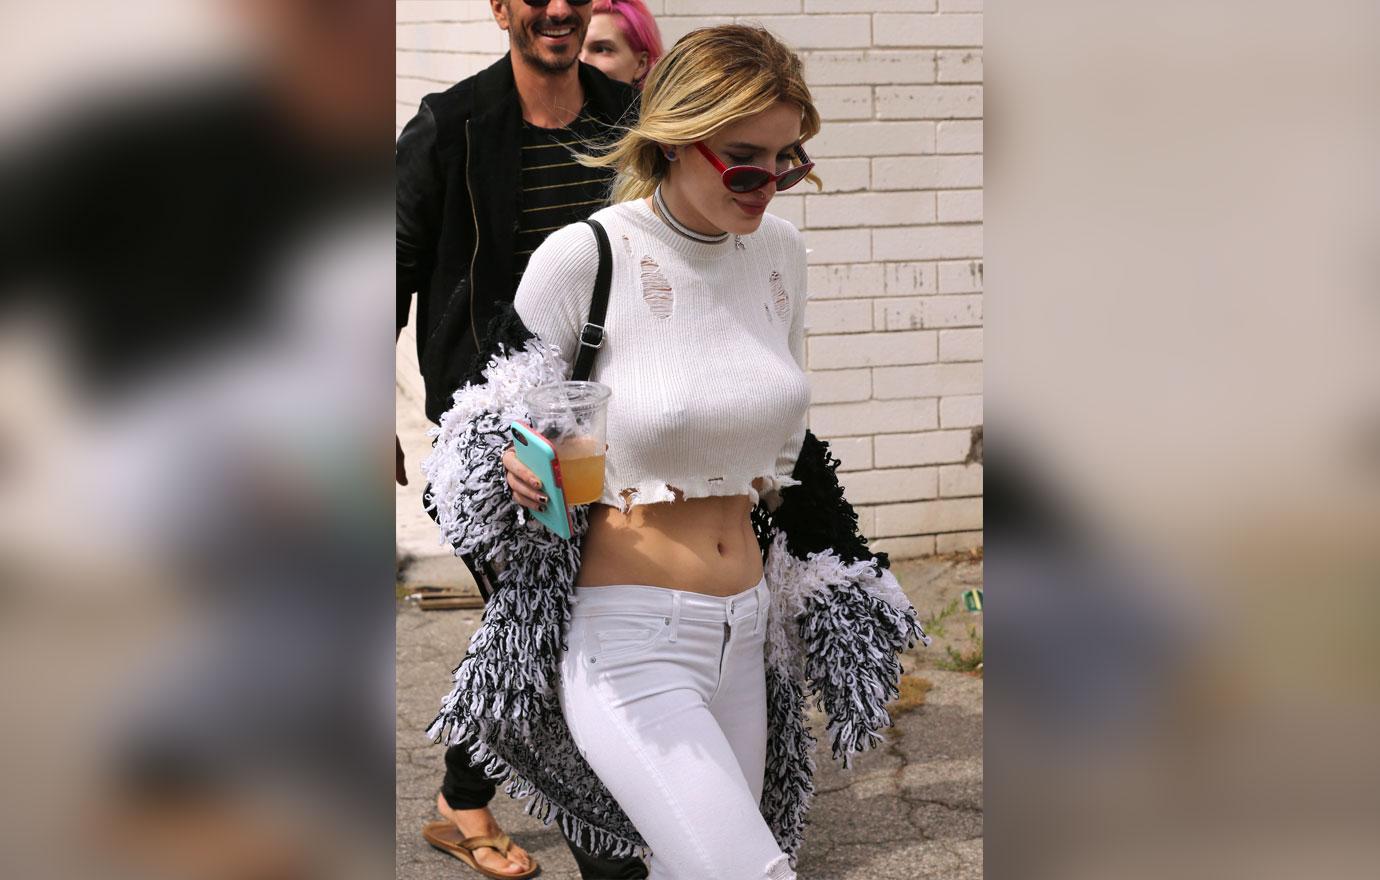 PICS] Free The Nipple! Bella Thorne Proves She Isn't About That